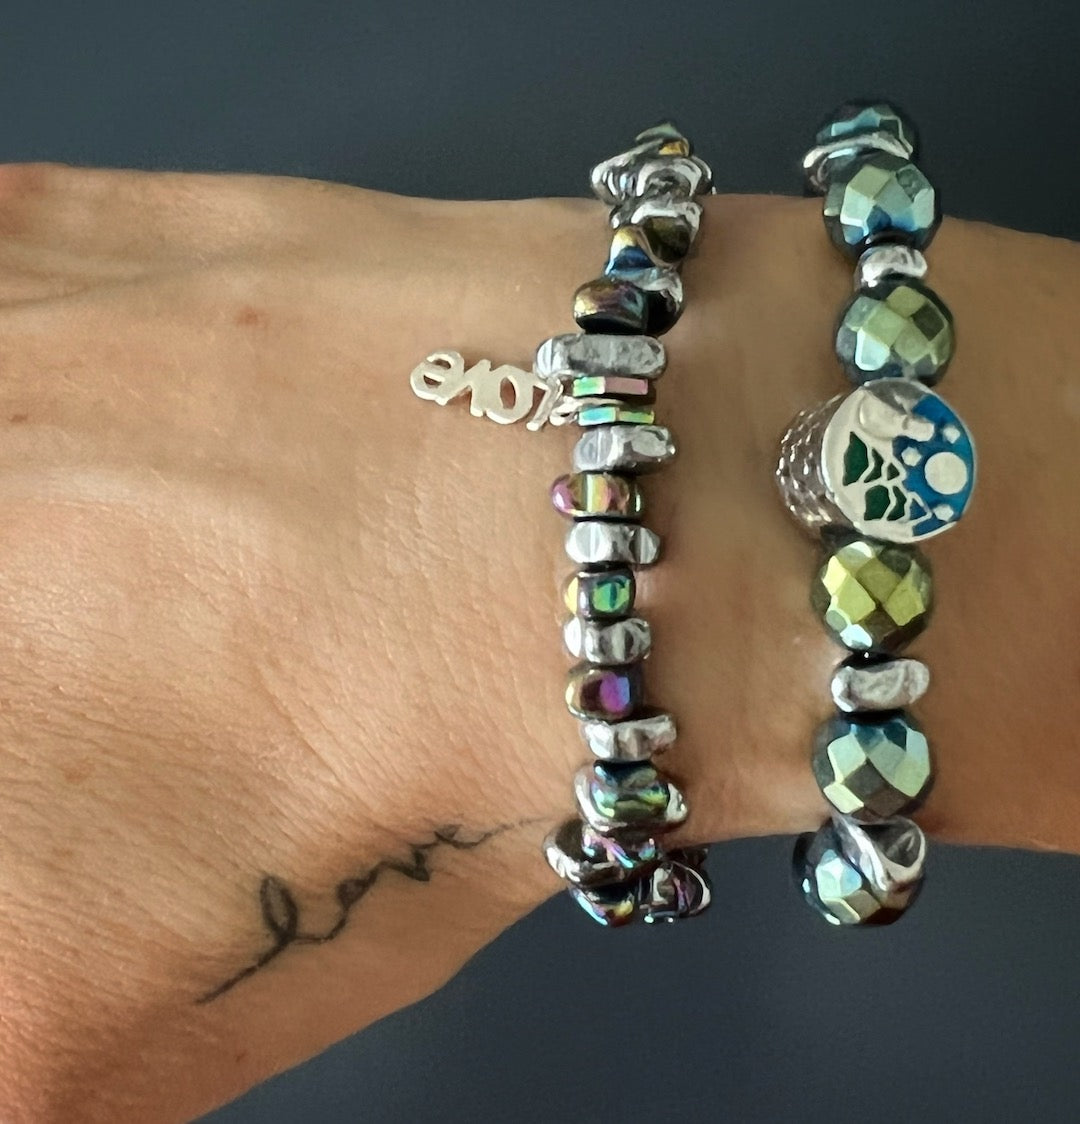 Embrace love and positivity with the Hematite Love Bracelet, beautifully worn by the hand model.